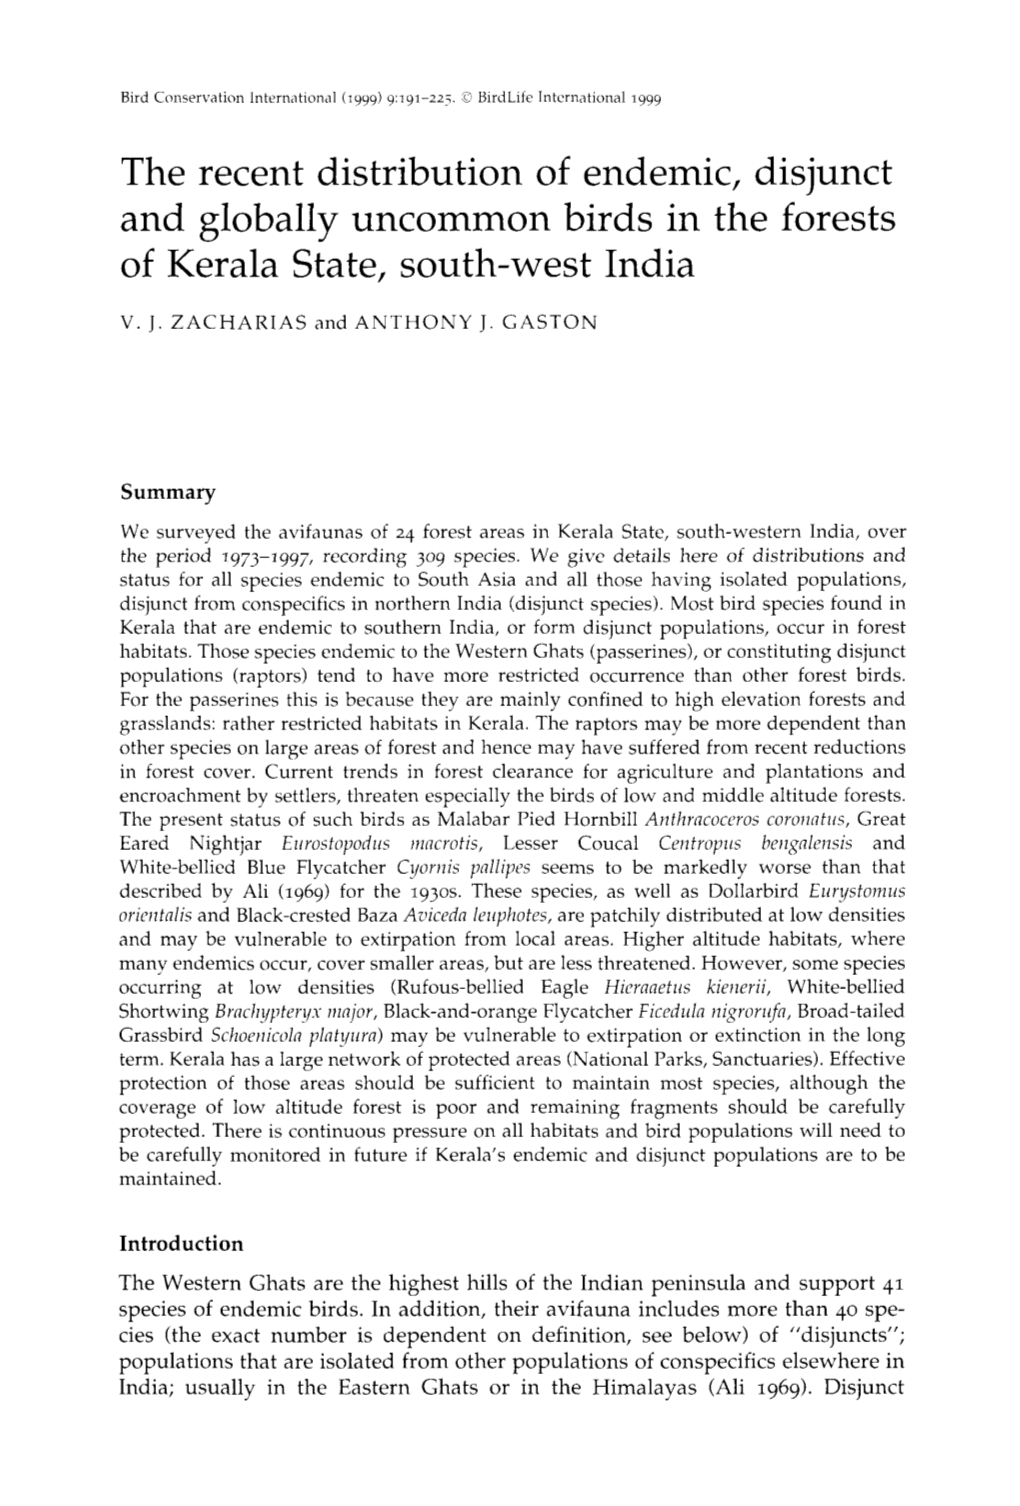 The Recent Distribution of Endemic, Disjunct and Globally Uncommon Birds in the Forests of Kerala State, South-West India